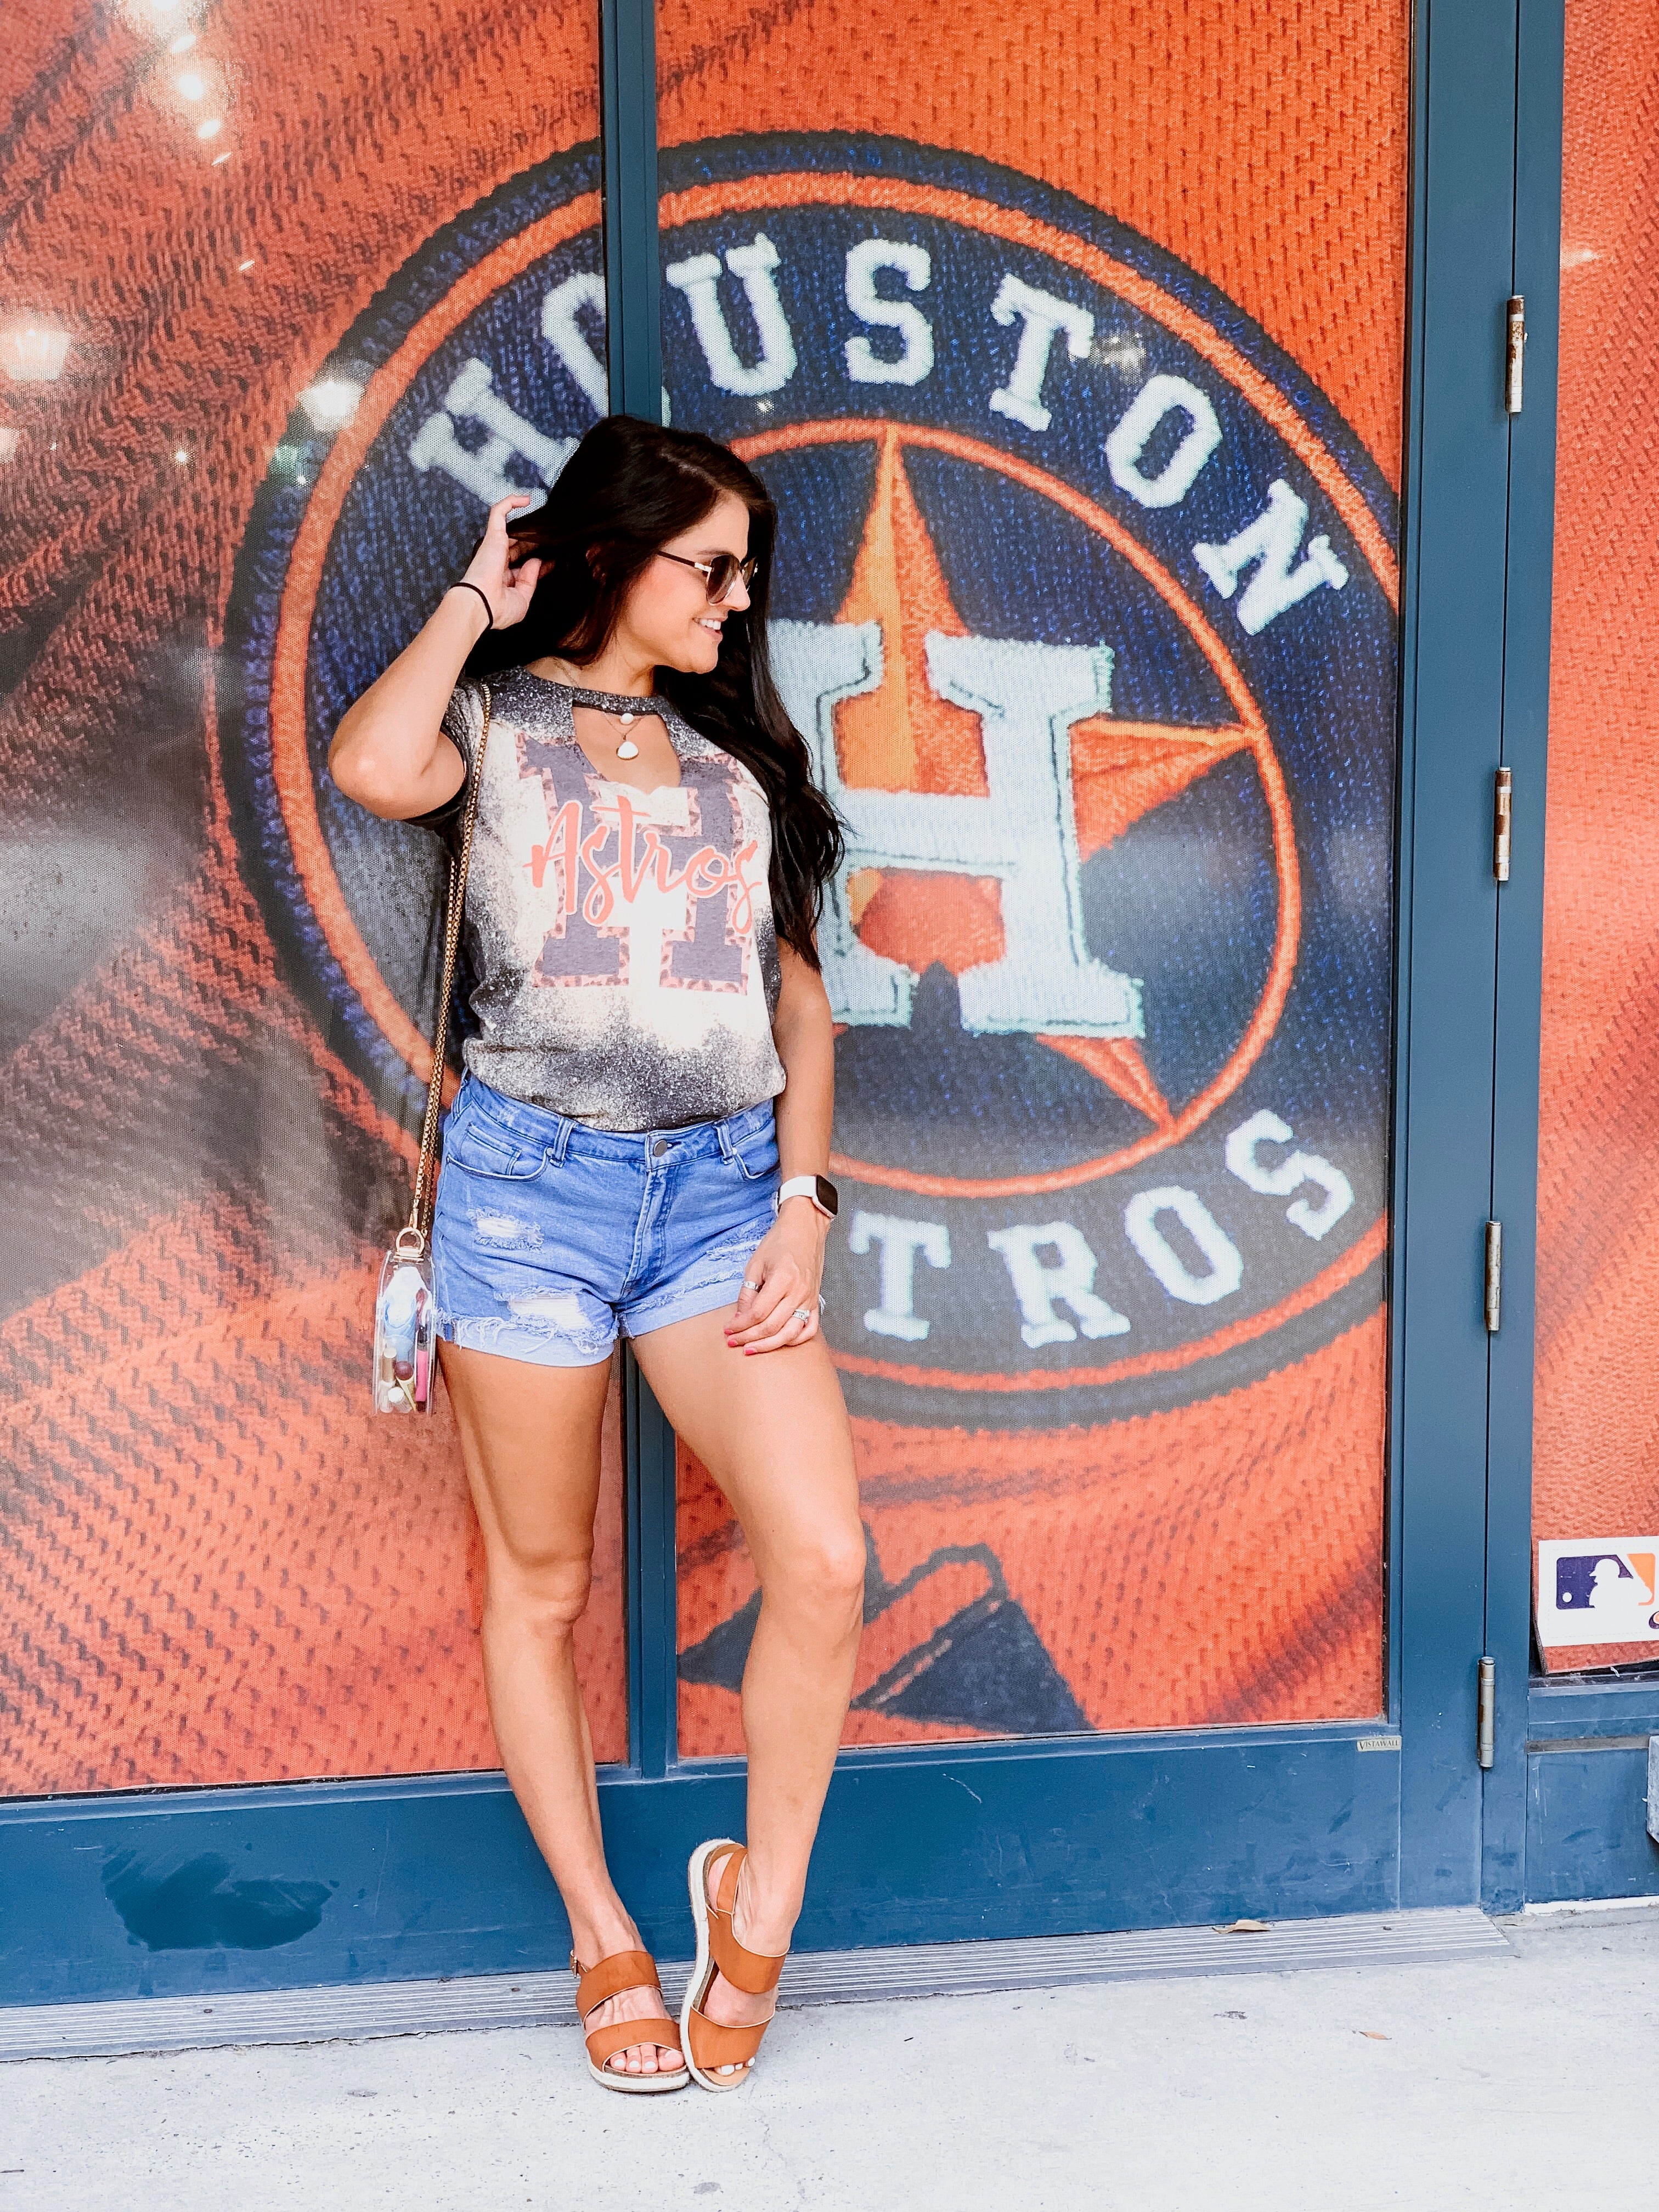 Jeremy Peña From Houston Astros With Love Shirt - Bugaloo Boutique